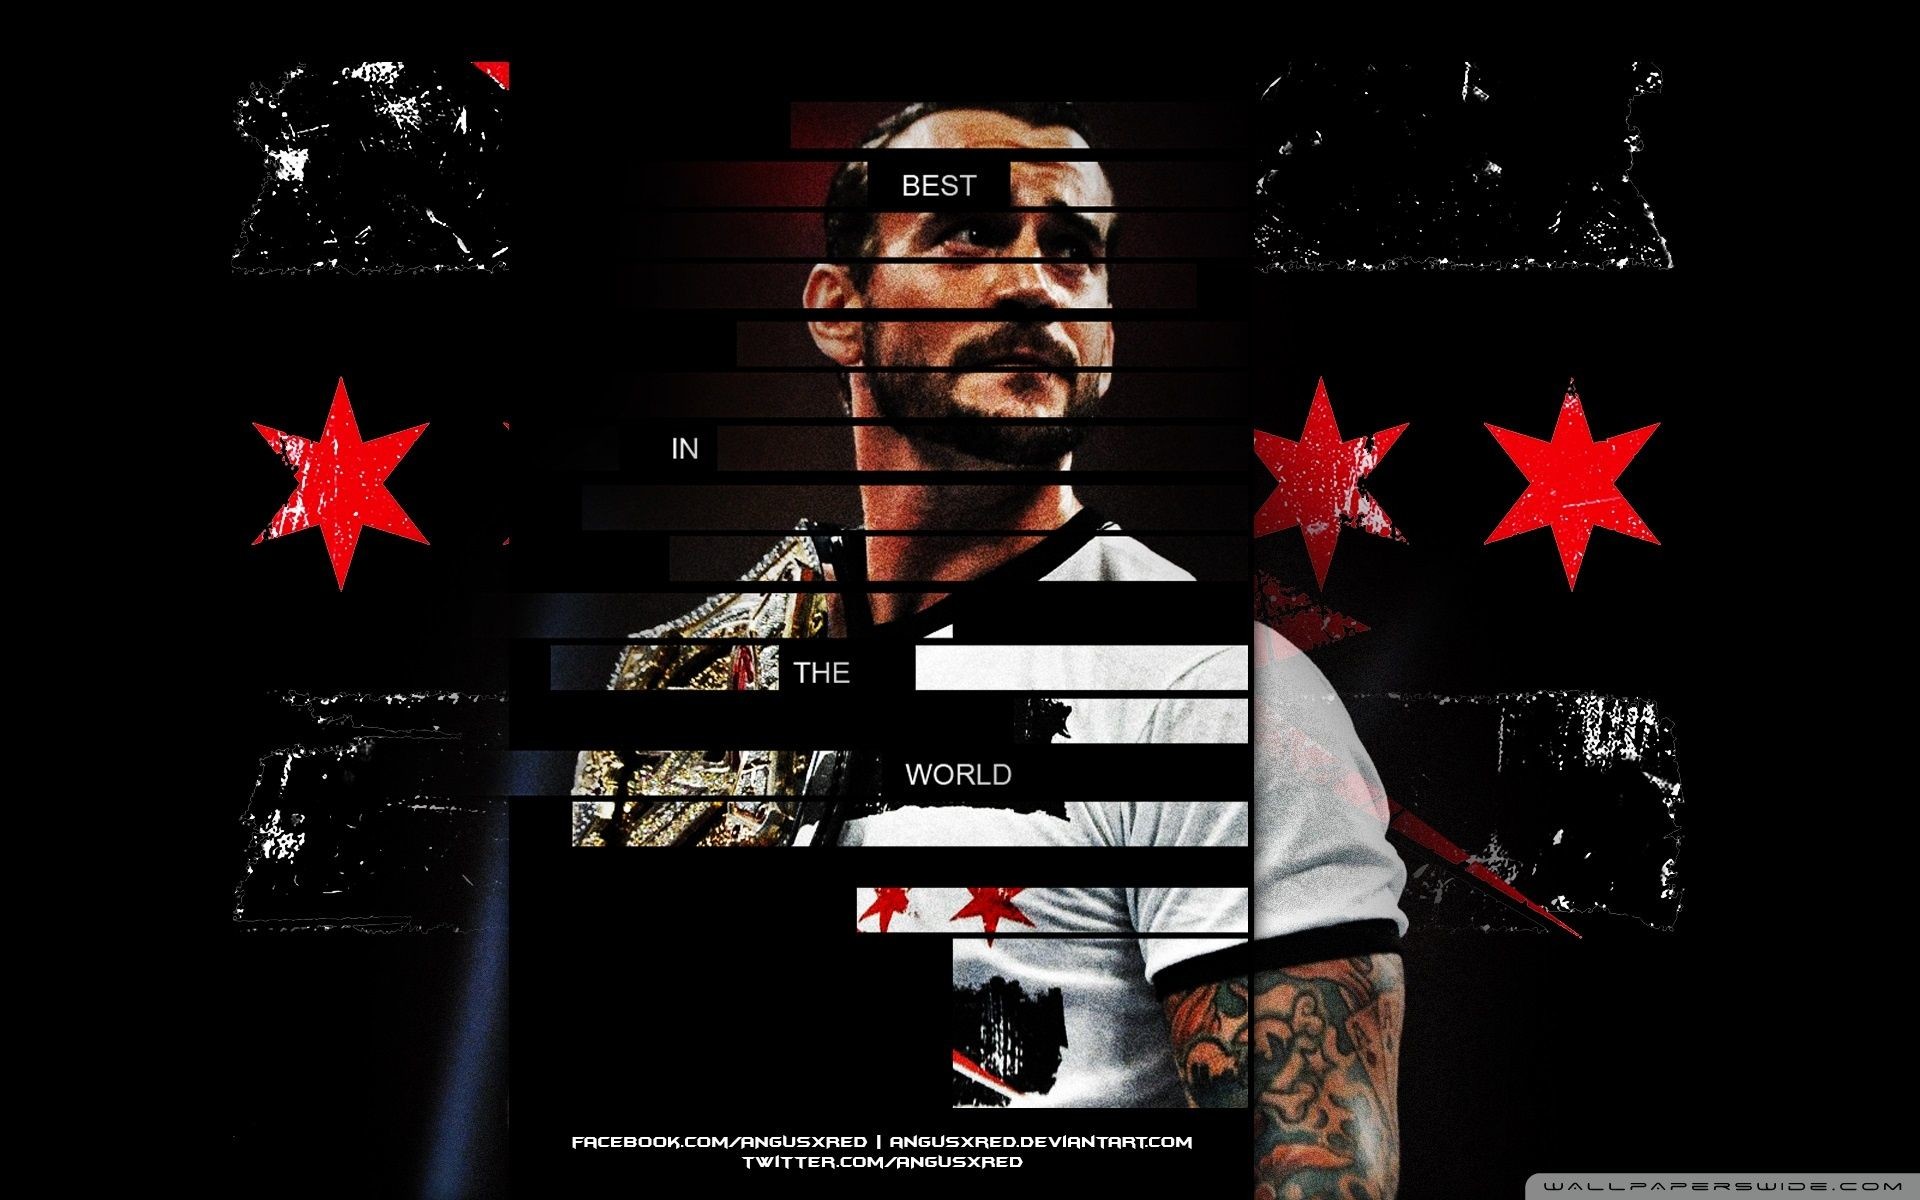 1920x1200 1280x720 WWE CM Punk NEW Wallpaper 2012 With Download Link - HD - YouTube">